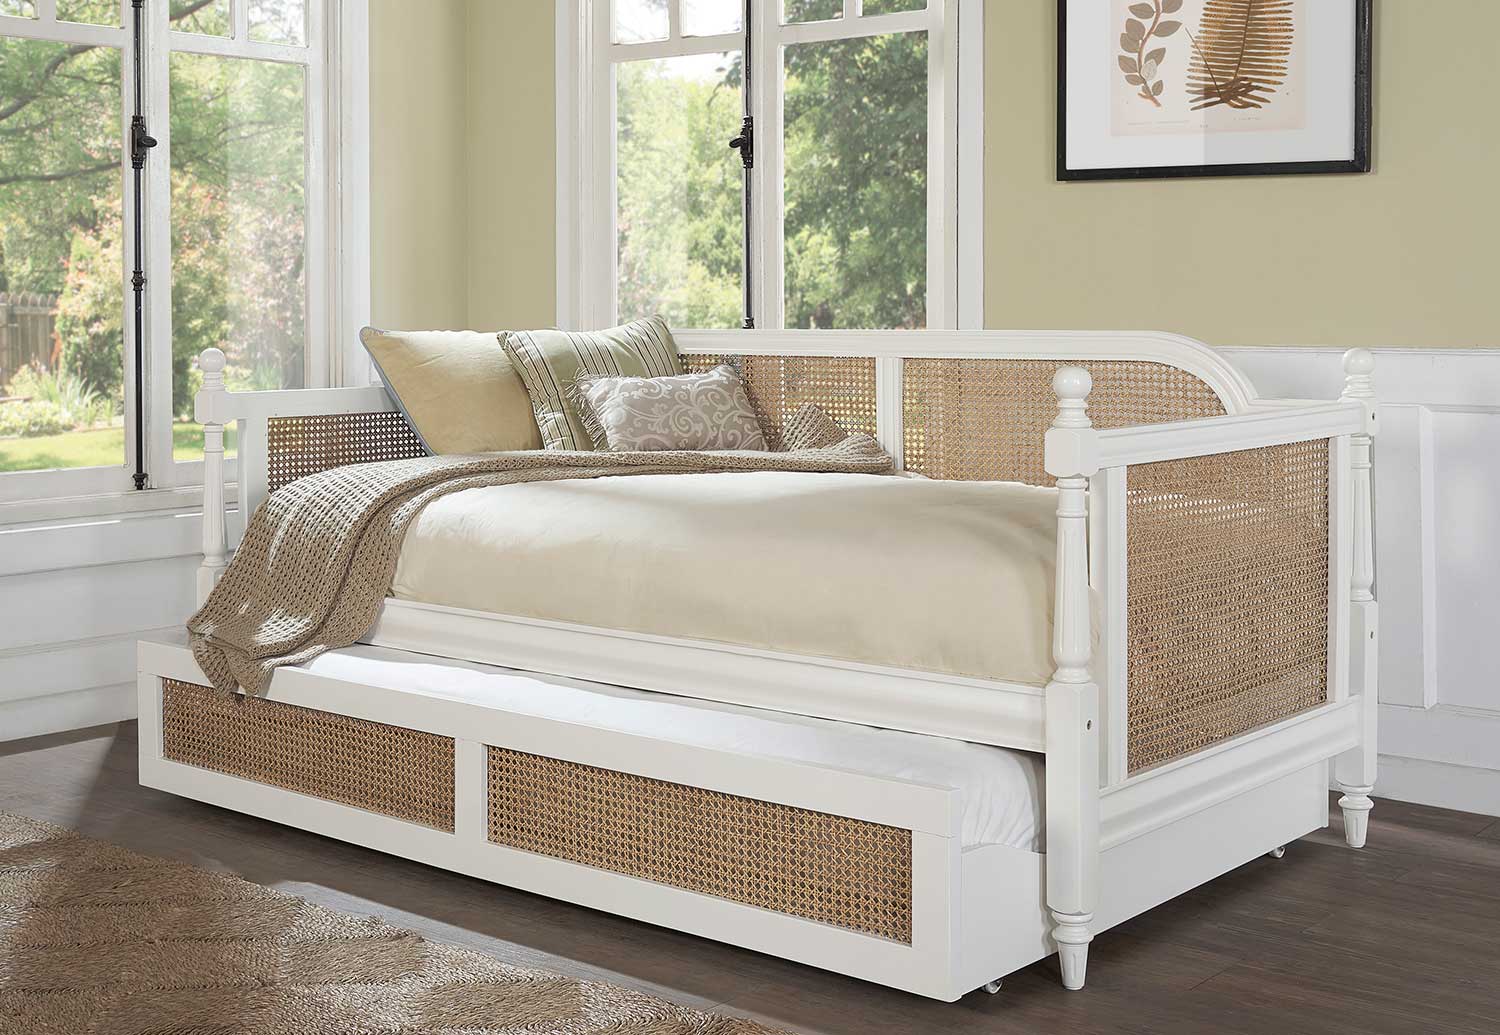 Hillsdale Melanie Daybed with Trundle - White